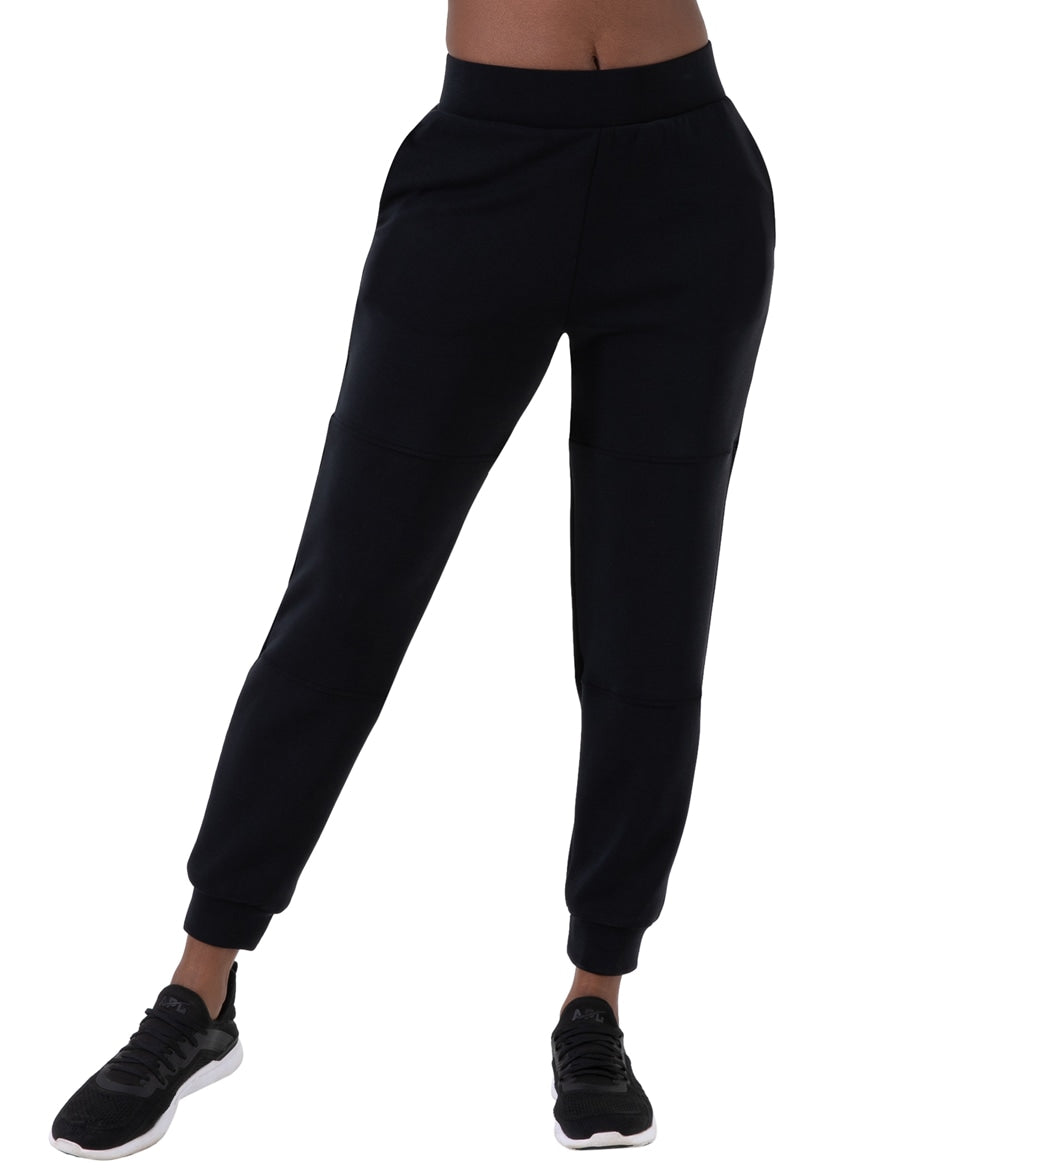 Women's High Waist Yoga Sweatpants, Best Yoga, Sports, Workout, Running & Training  Sweatpants for Sale at the Lowest Prices – SHEJOLLY